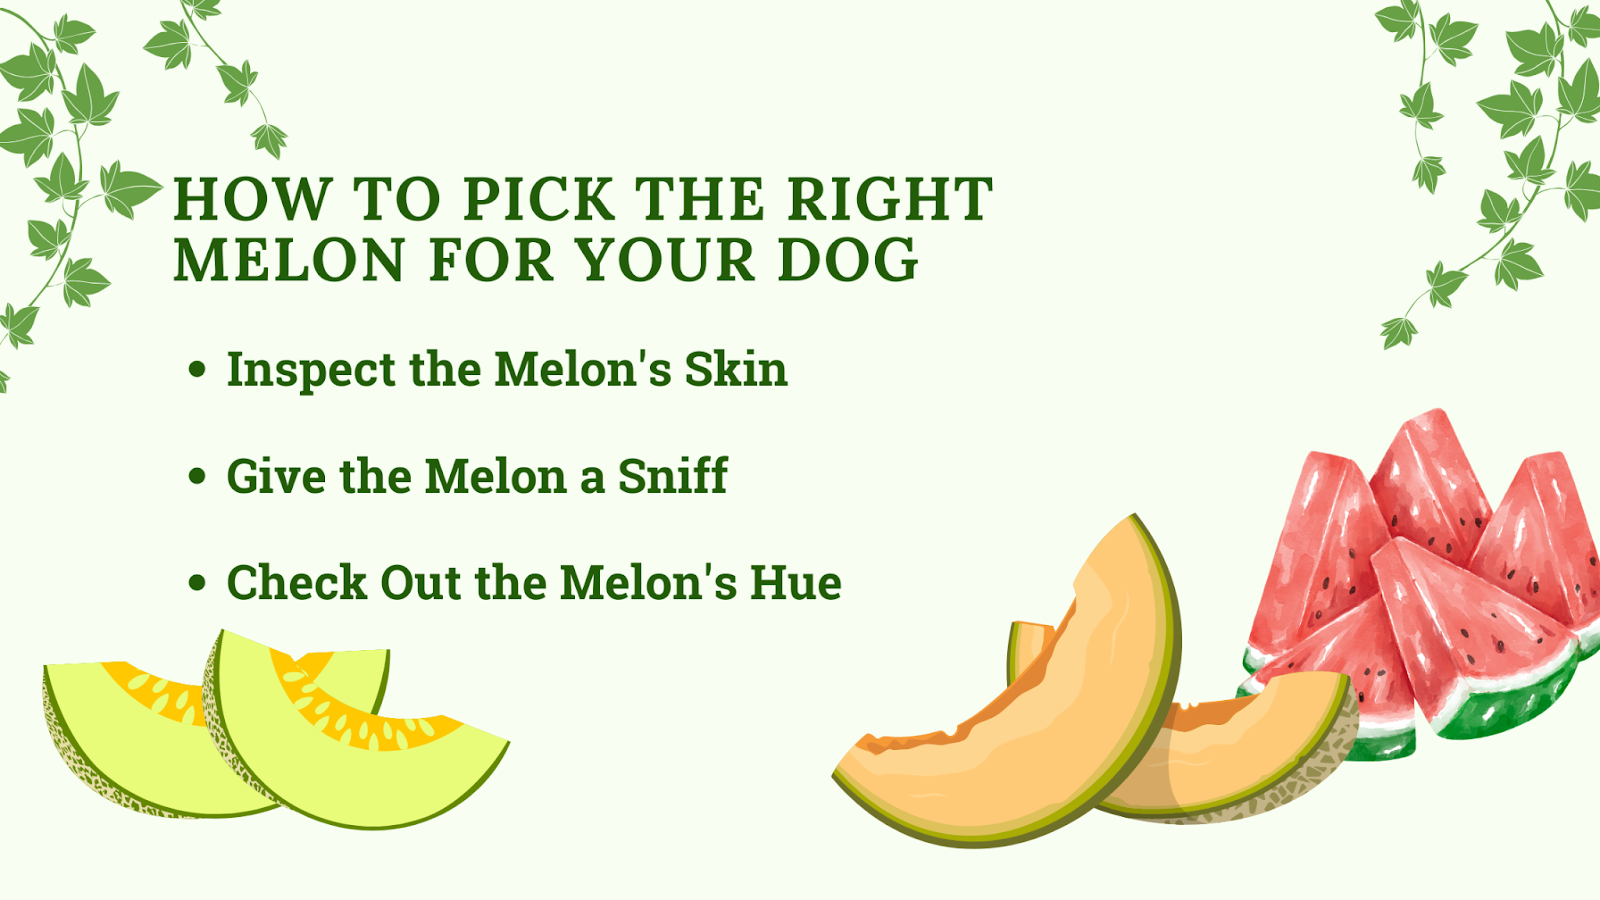 How to pick the right melon for dogs